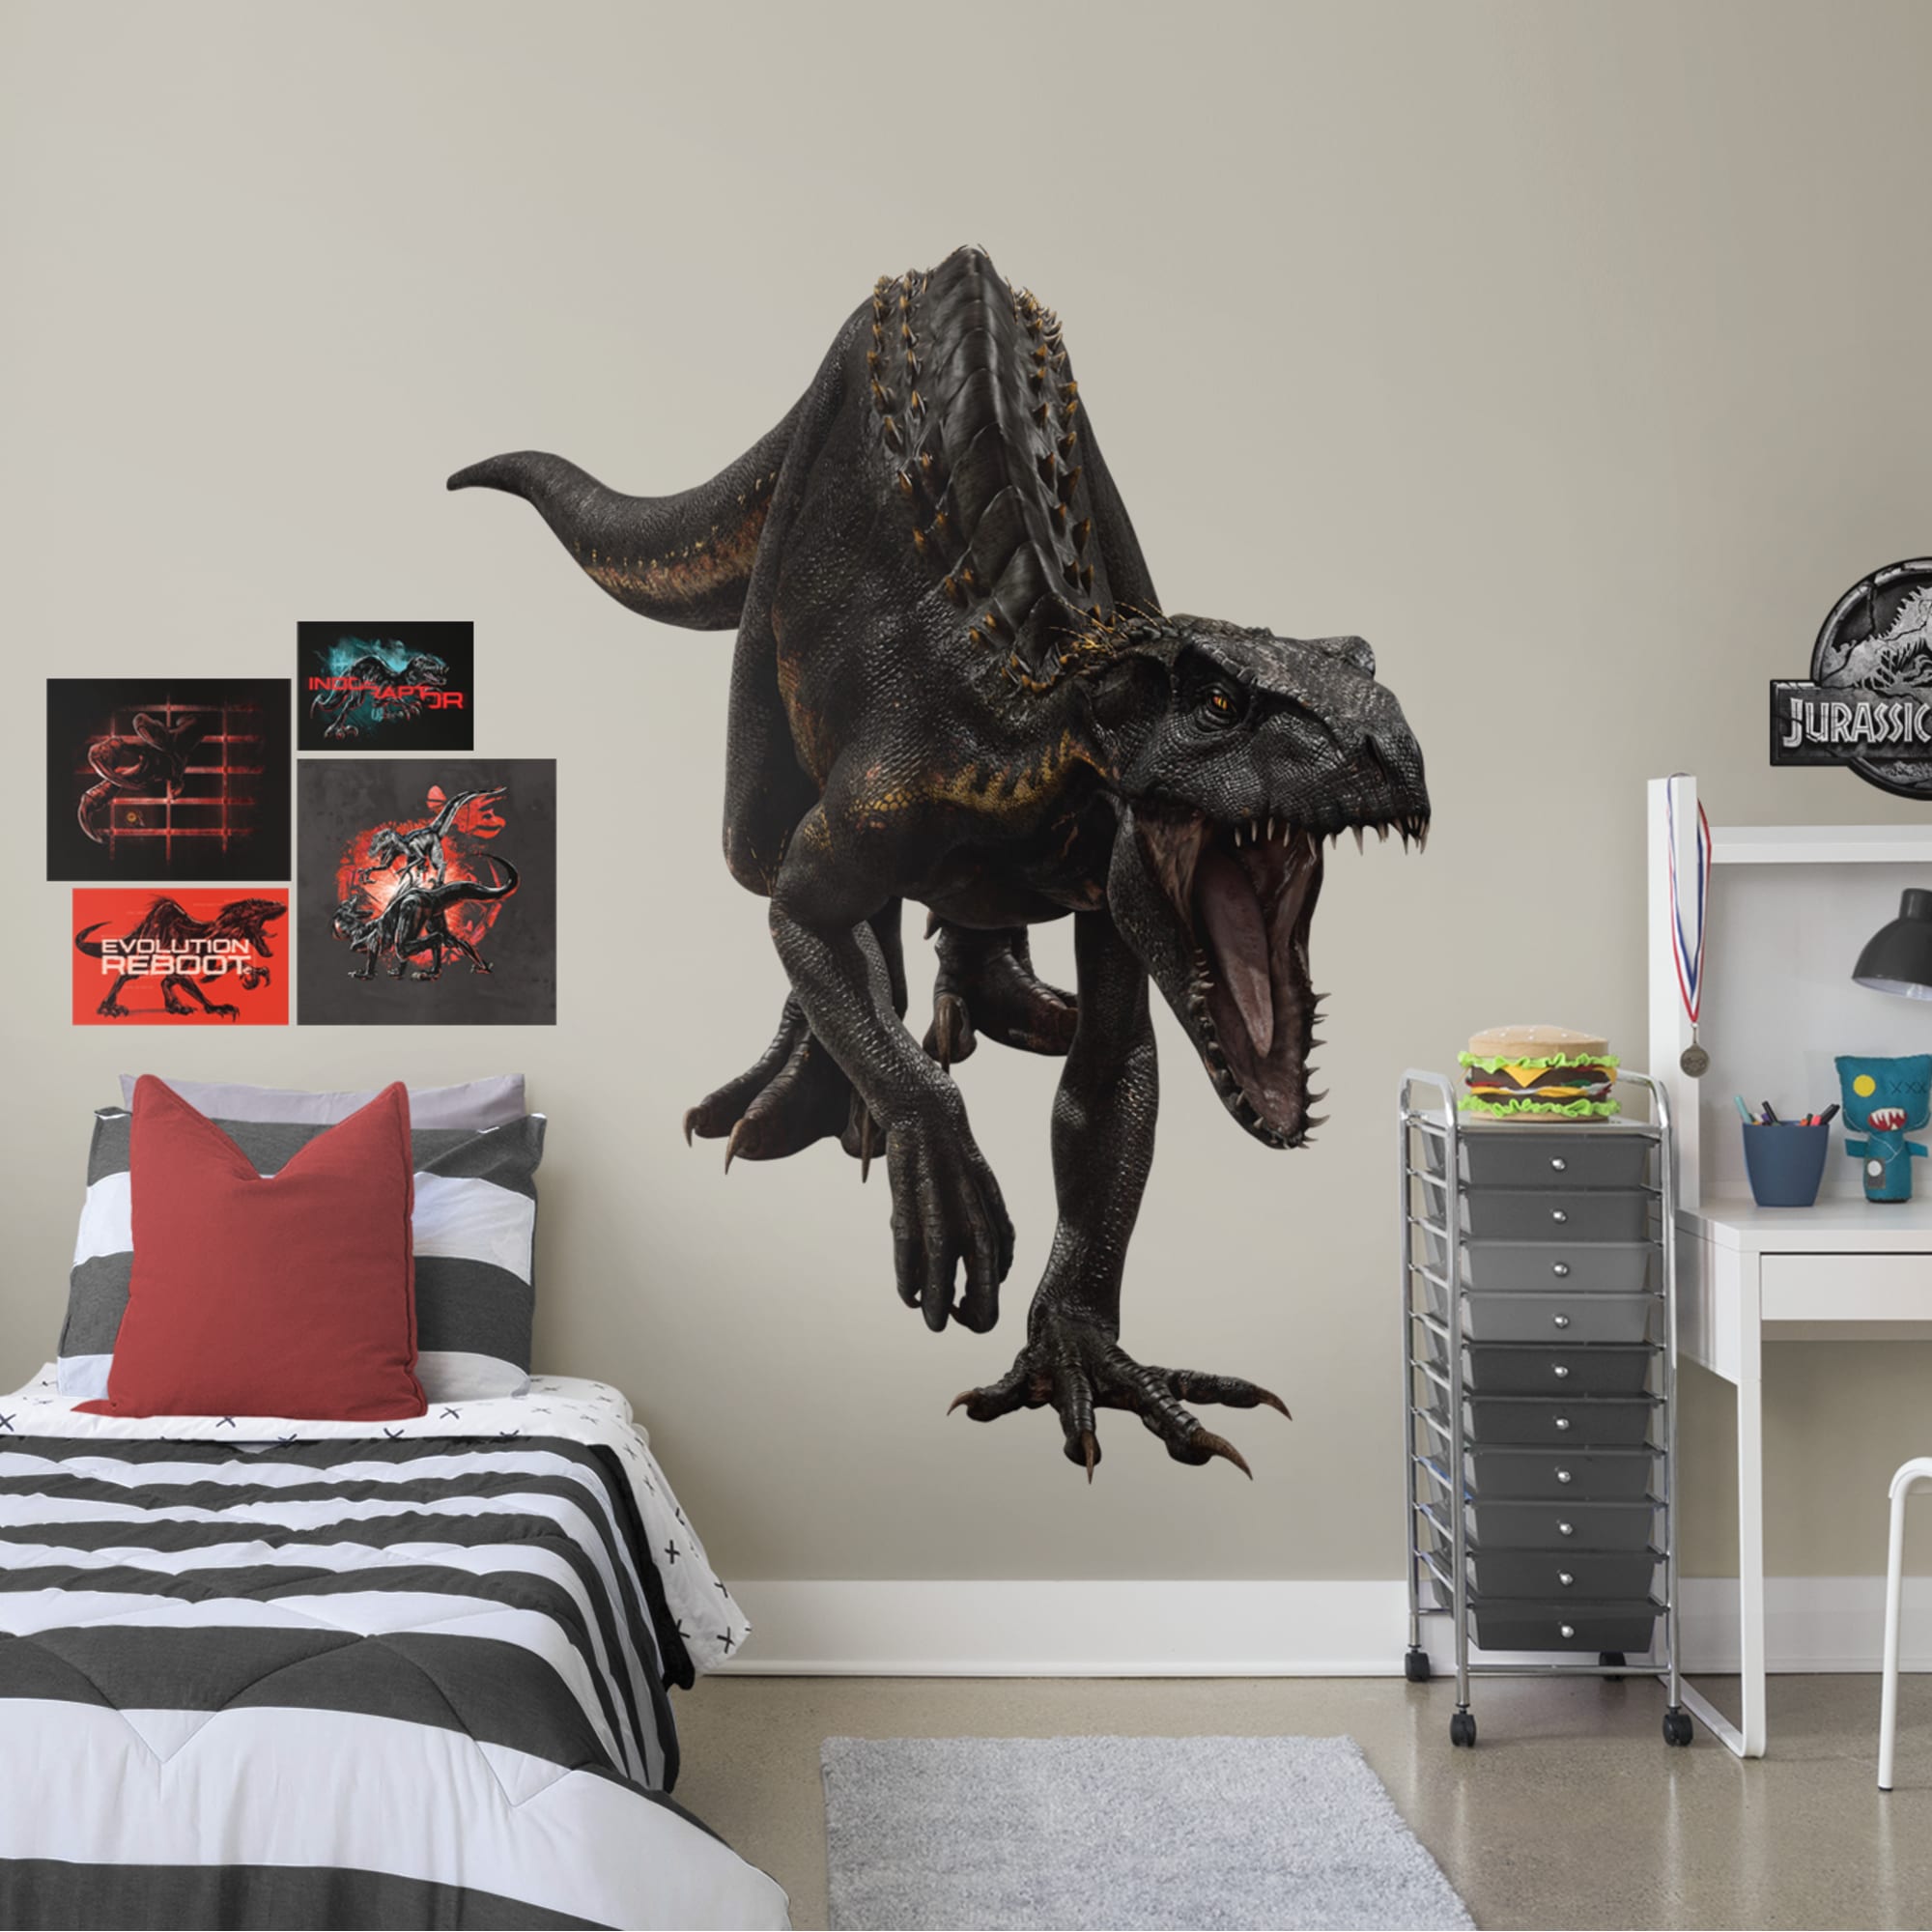 Indo Raptor - Jurassic World: Fallen Kingdom - Officially Licensed Removable Wall Decal Huge Character + 5 Decals (61"W x 77"H)